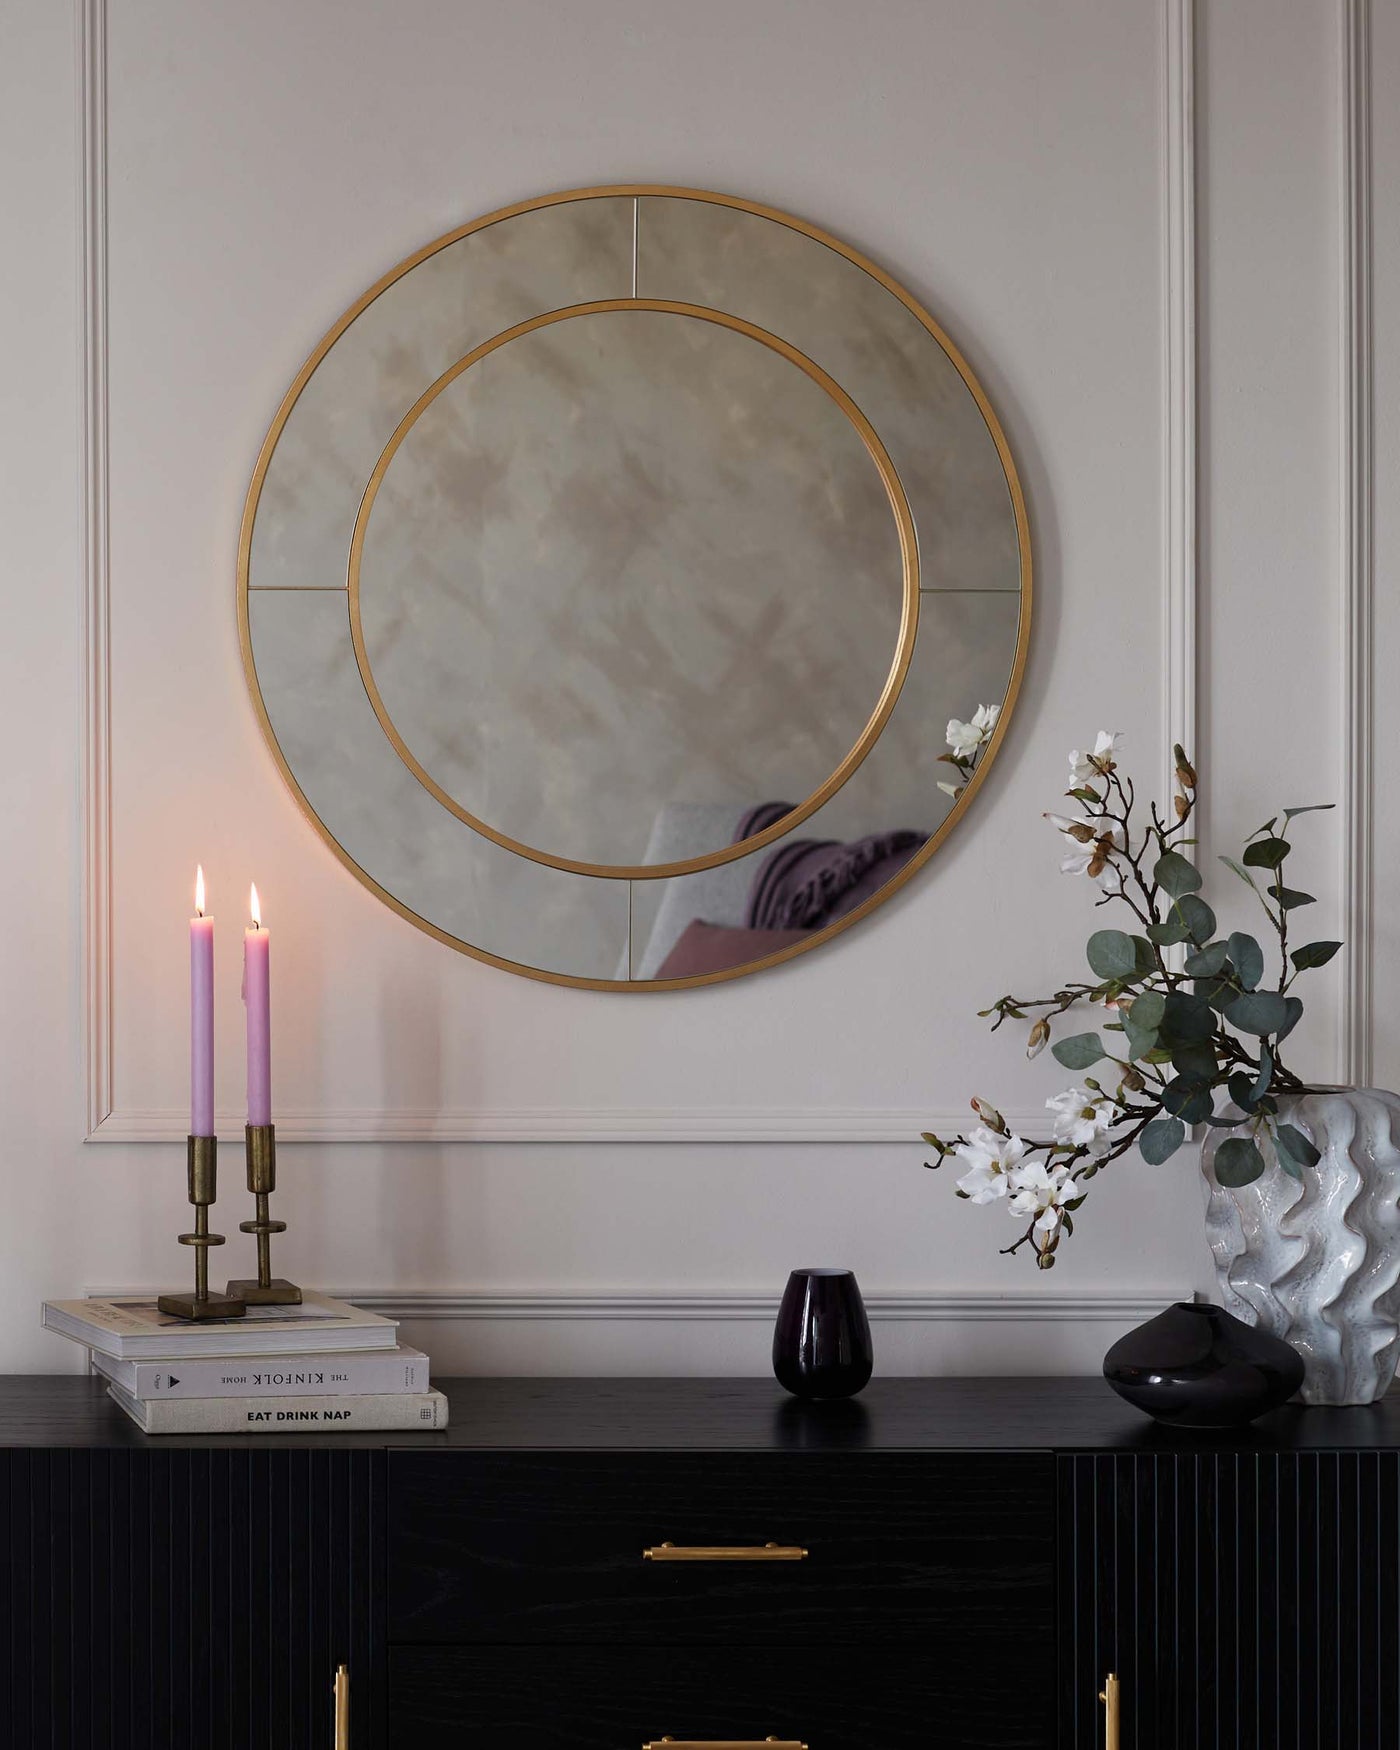 Elegant modern black sideboard cabinet with vertical ridges and brass handles, topped with minimalist decorative items including a brass two-candle holder with lit candles, stacked coffee table books, and assorted vases, set against a wall with a large round mirror featuring a cloudy reflective surface and a thin gold frame.